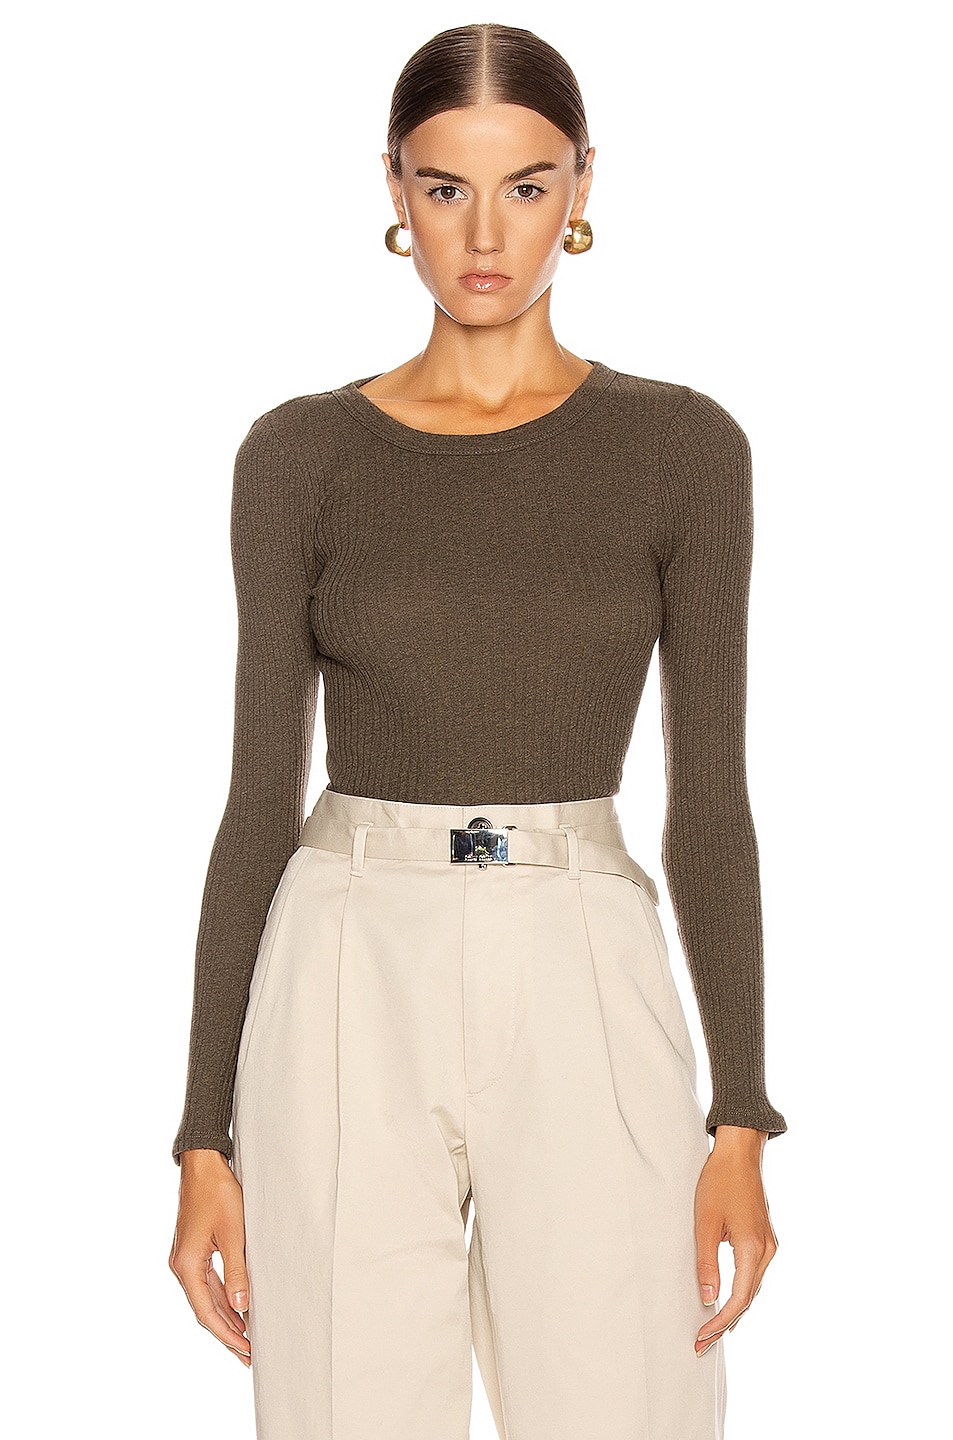 Image 1 of Enza Costa Cashmere Poorboy Rib Long Sleeve Crew Top in Olive Drab